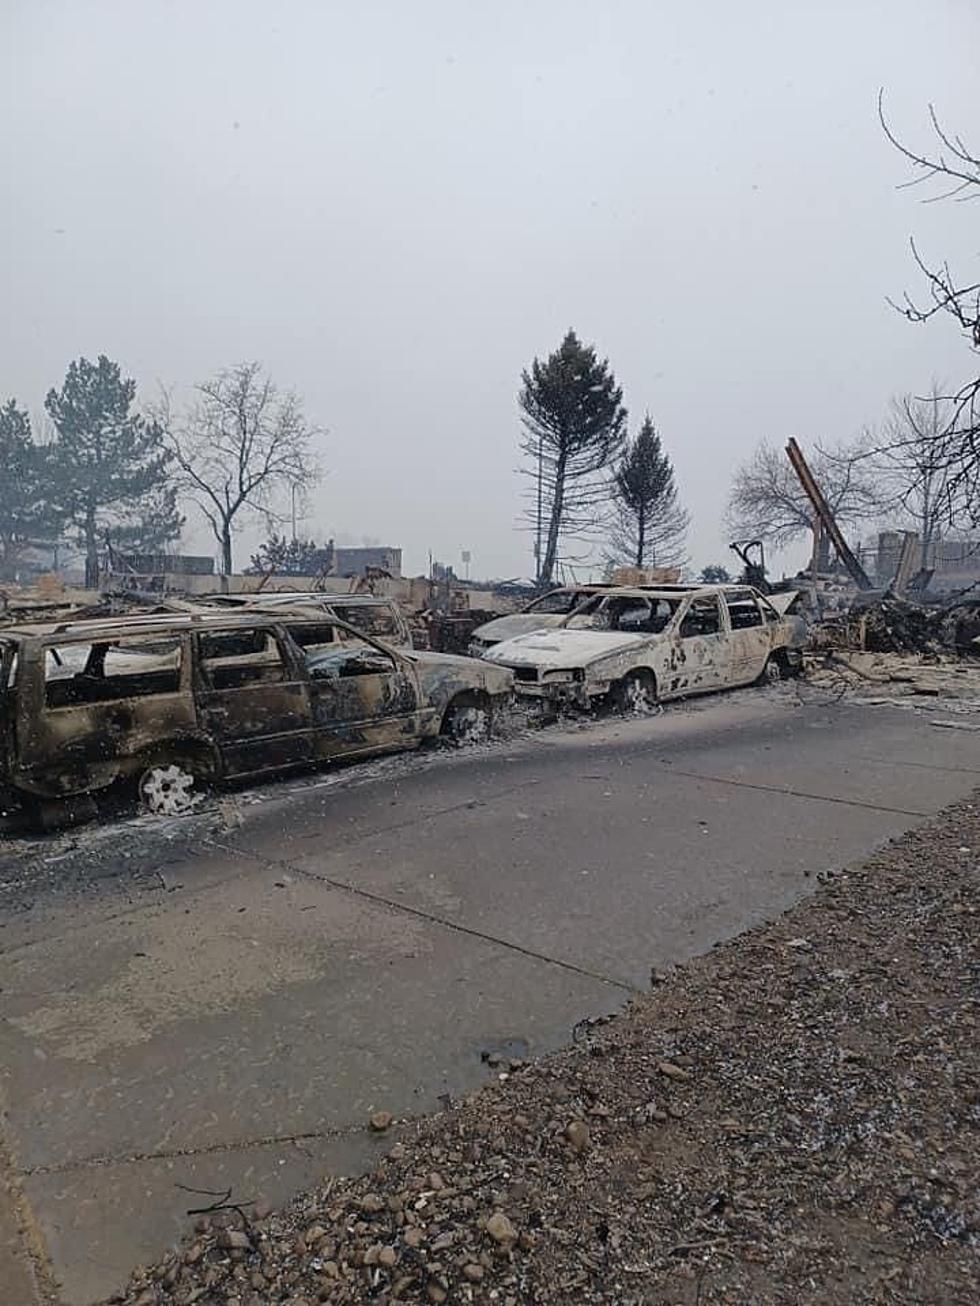 Have You Seen The Marshall Fire Aftermath? These Photos Are Heartbreaking